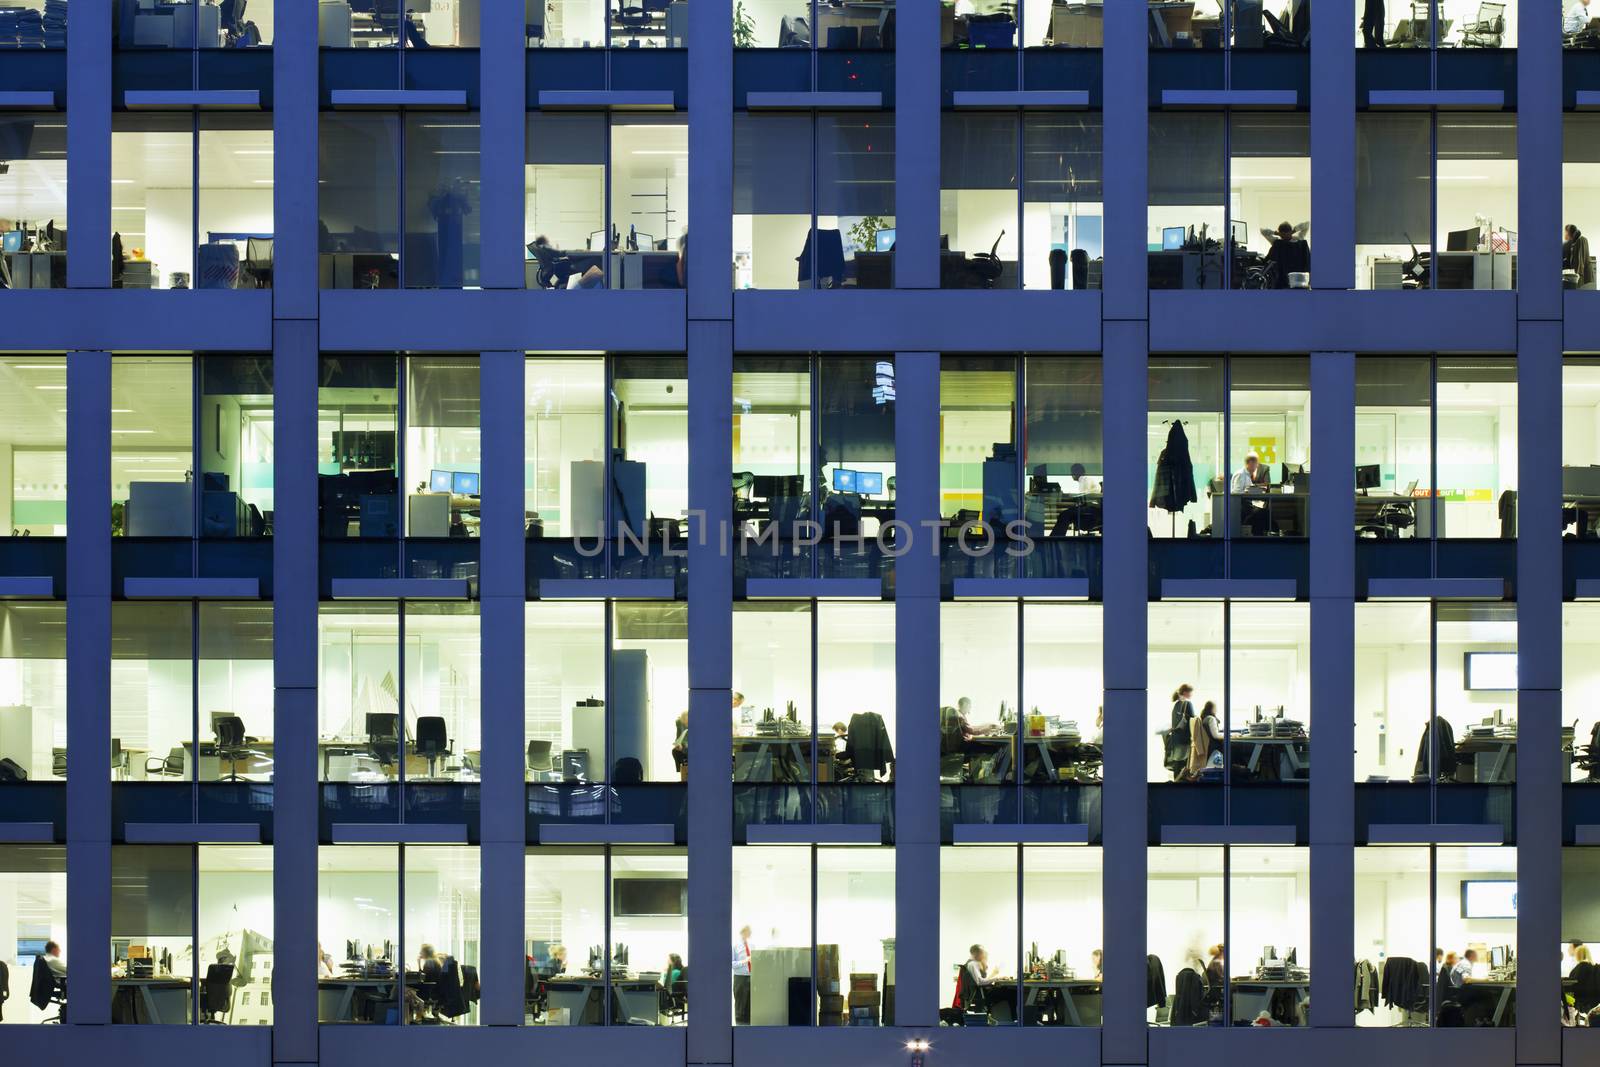 Modern office at night, showing the daily activity of office workers